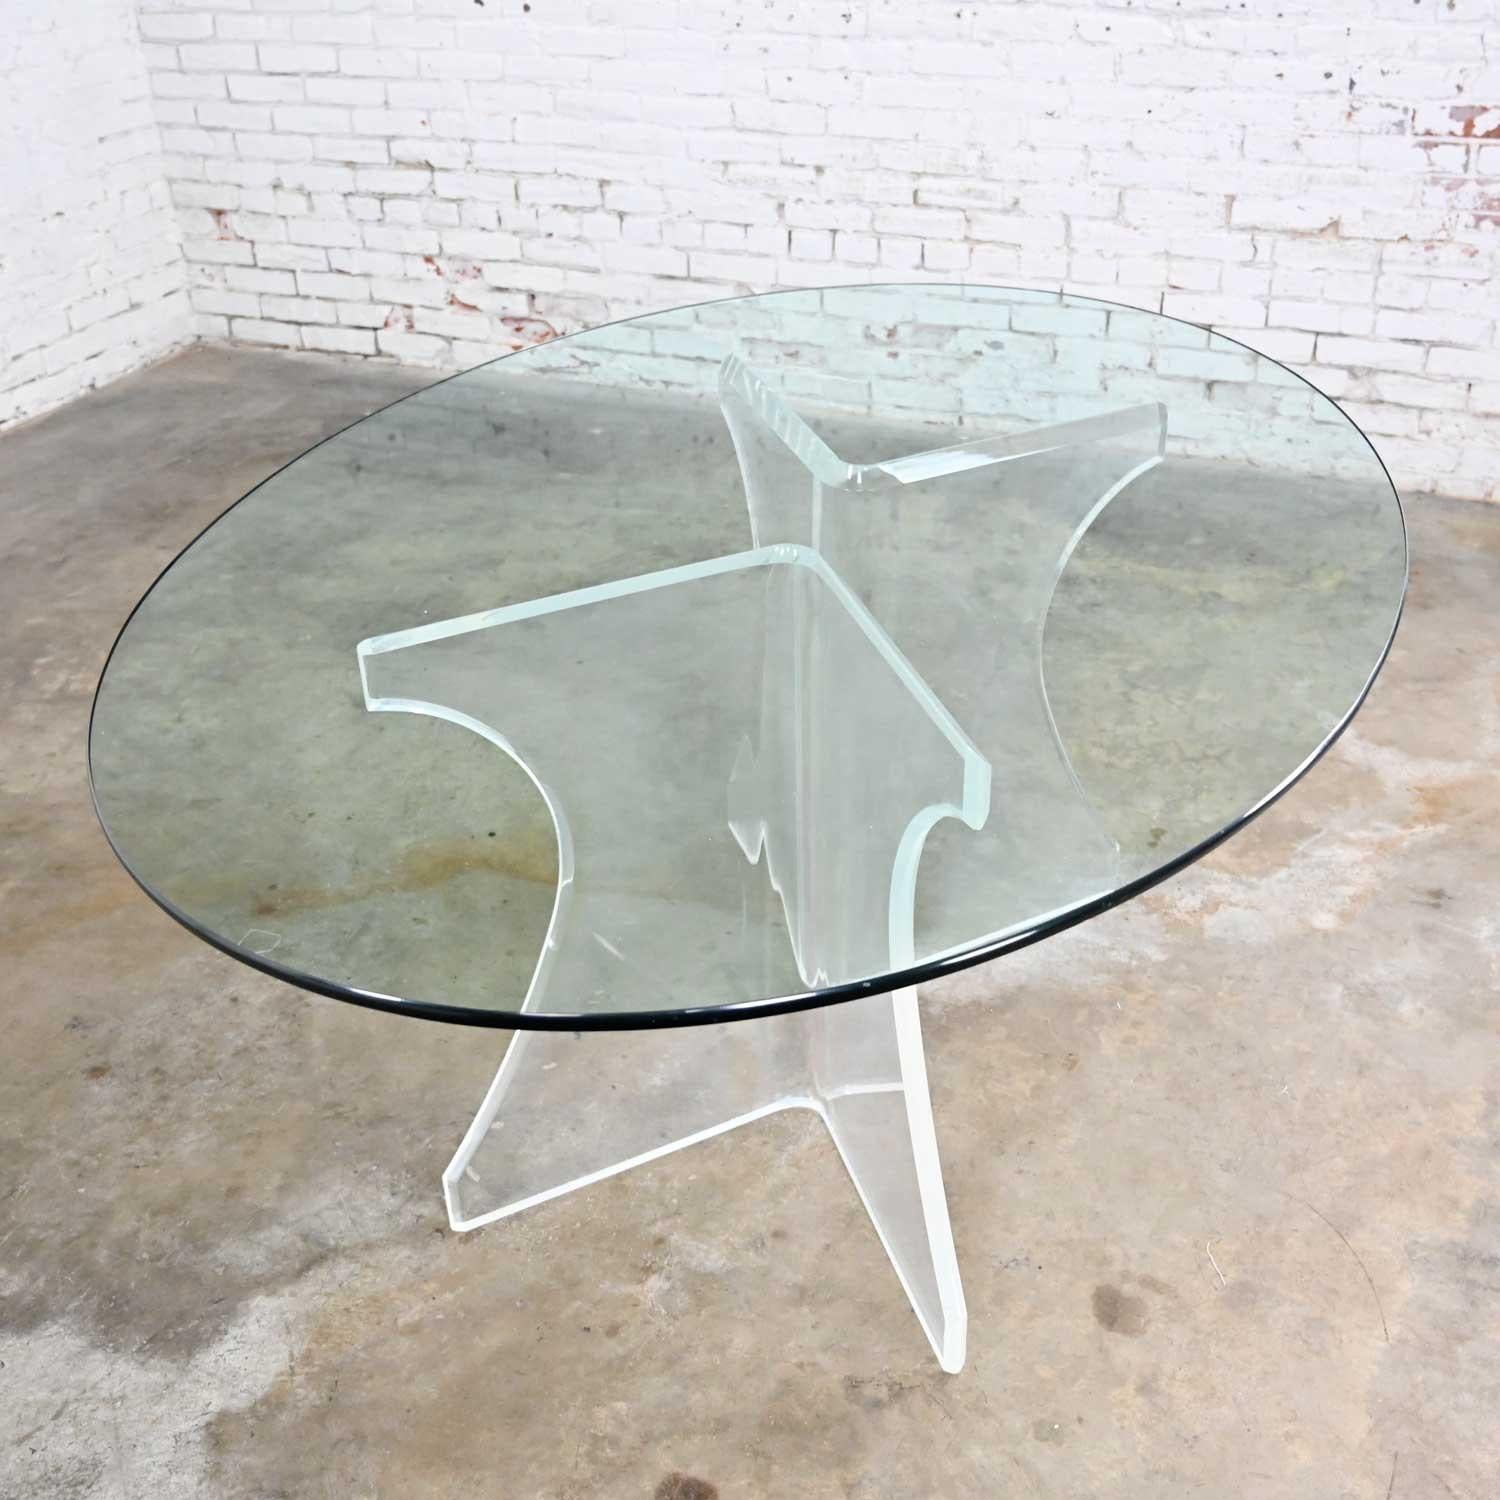 Modern Hollywood Regency Art Deco Lucite Sculptural Dining Table Oval Glass Top For Sale 1